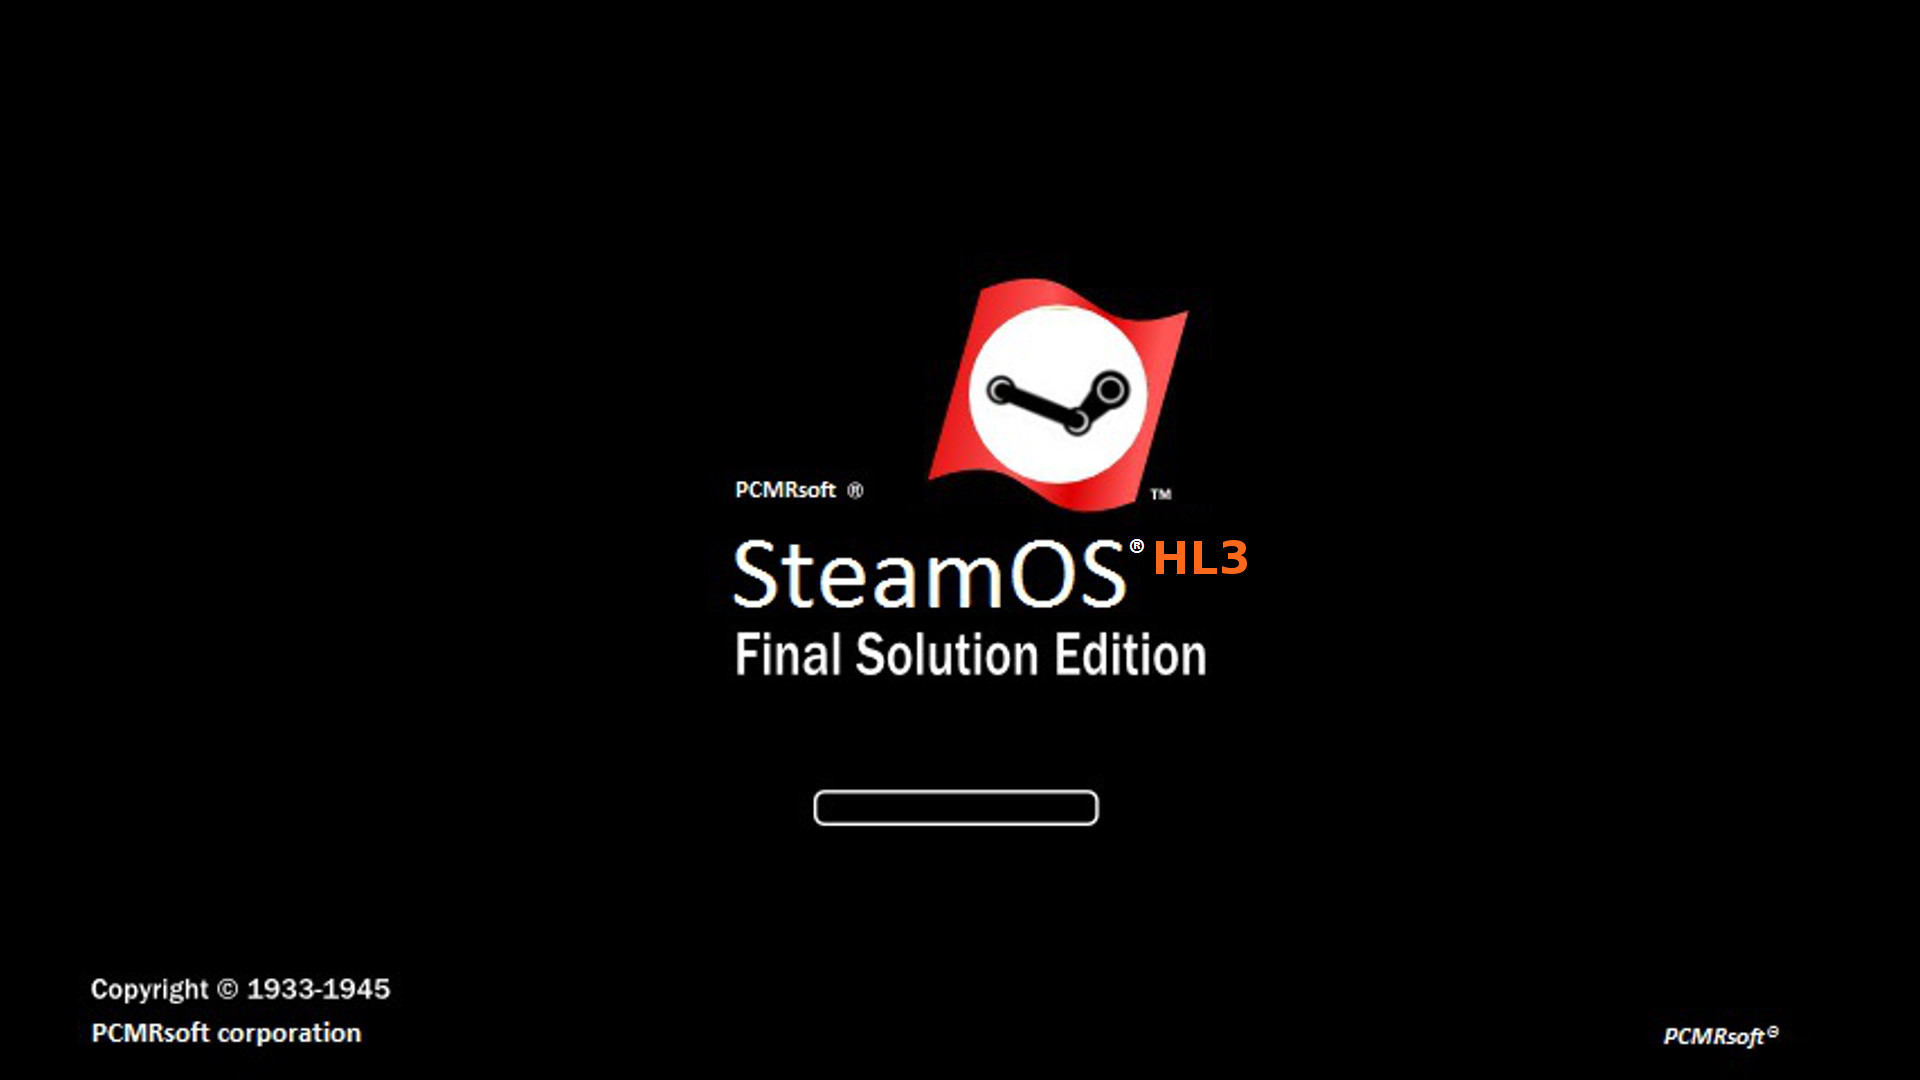 1920x1080 SteamOS final solution edition